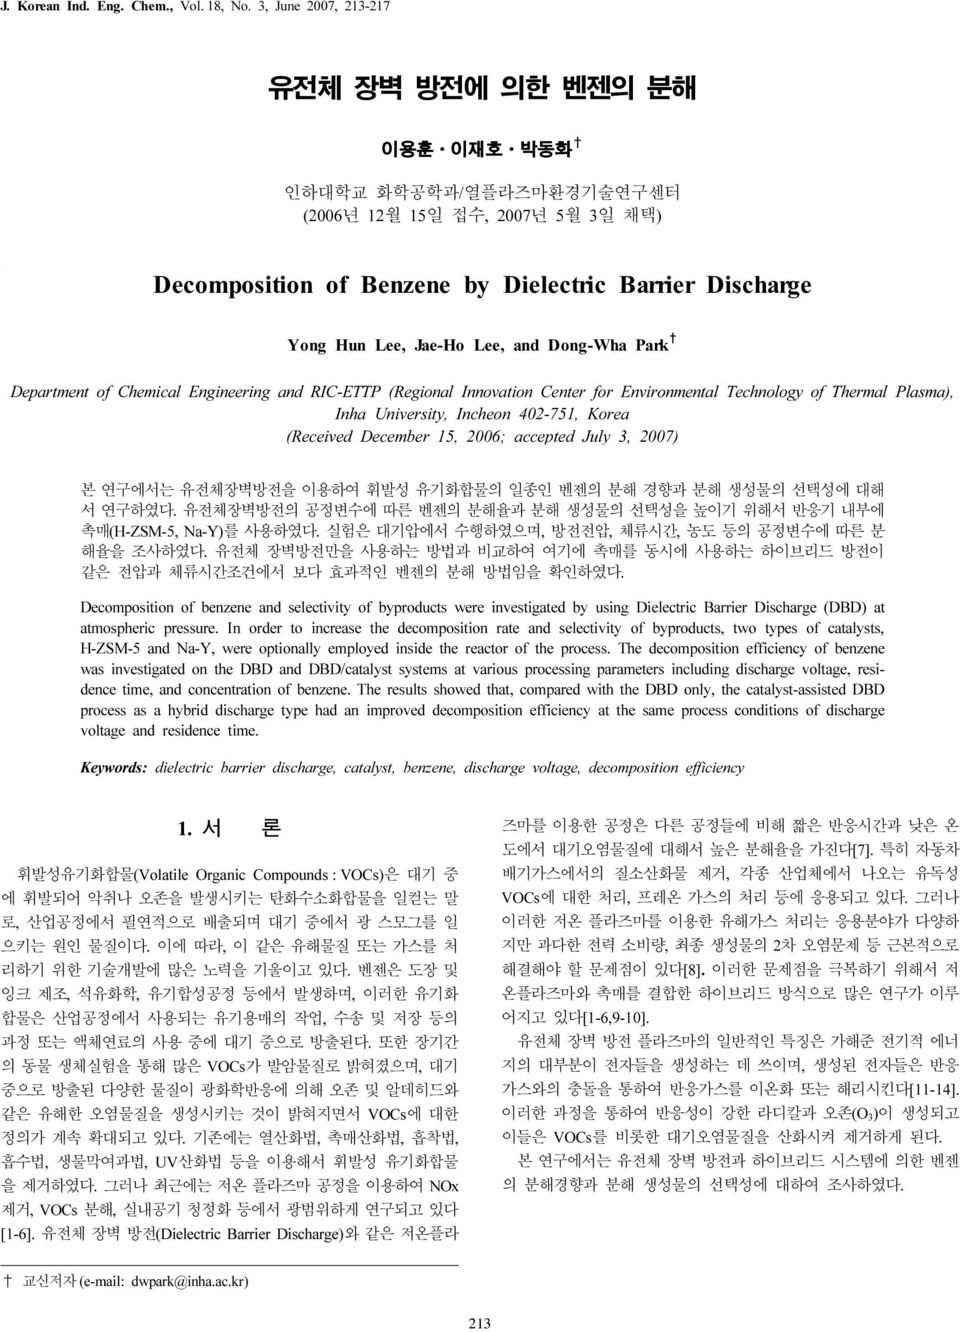 and Dong-Wha Park Department of Chemical Engineering and RIC-ETTP (Regional Innovation Center for Environmental Technology of Thermal Plasma), Inha University, Incheon 402-751, Korea (Received